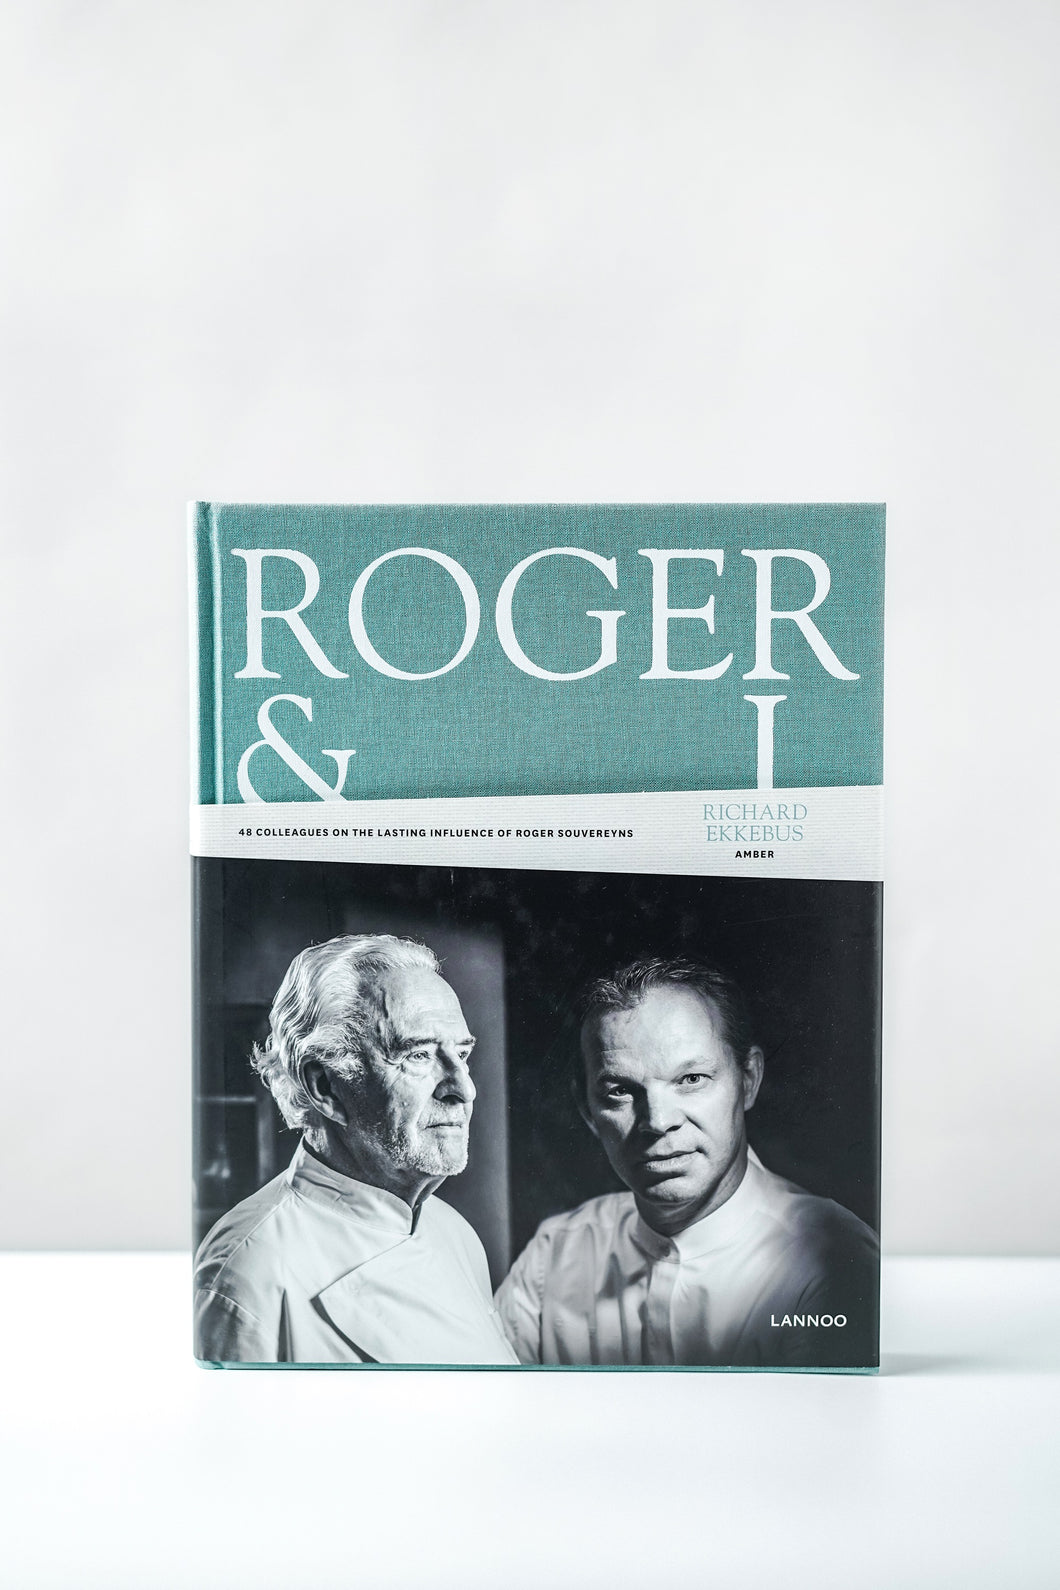 Roger & I: 48 Colleagues on the Lasting Influence of Roger Souvereyns